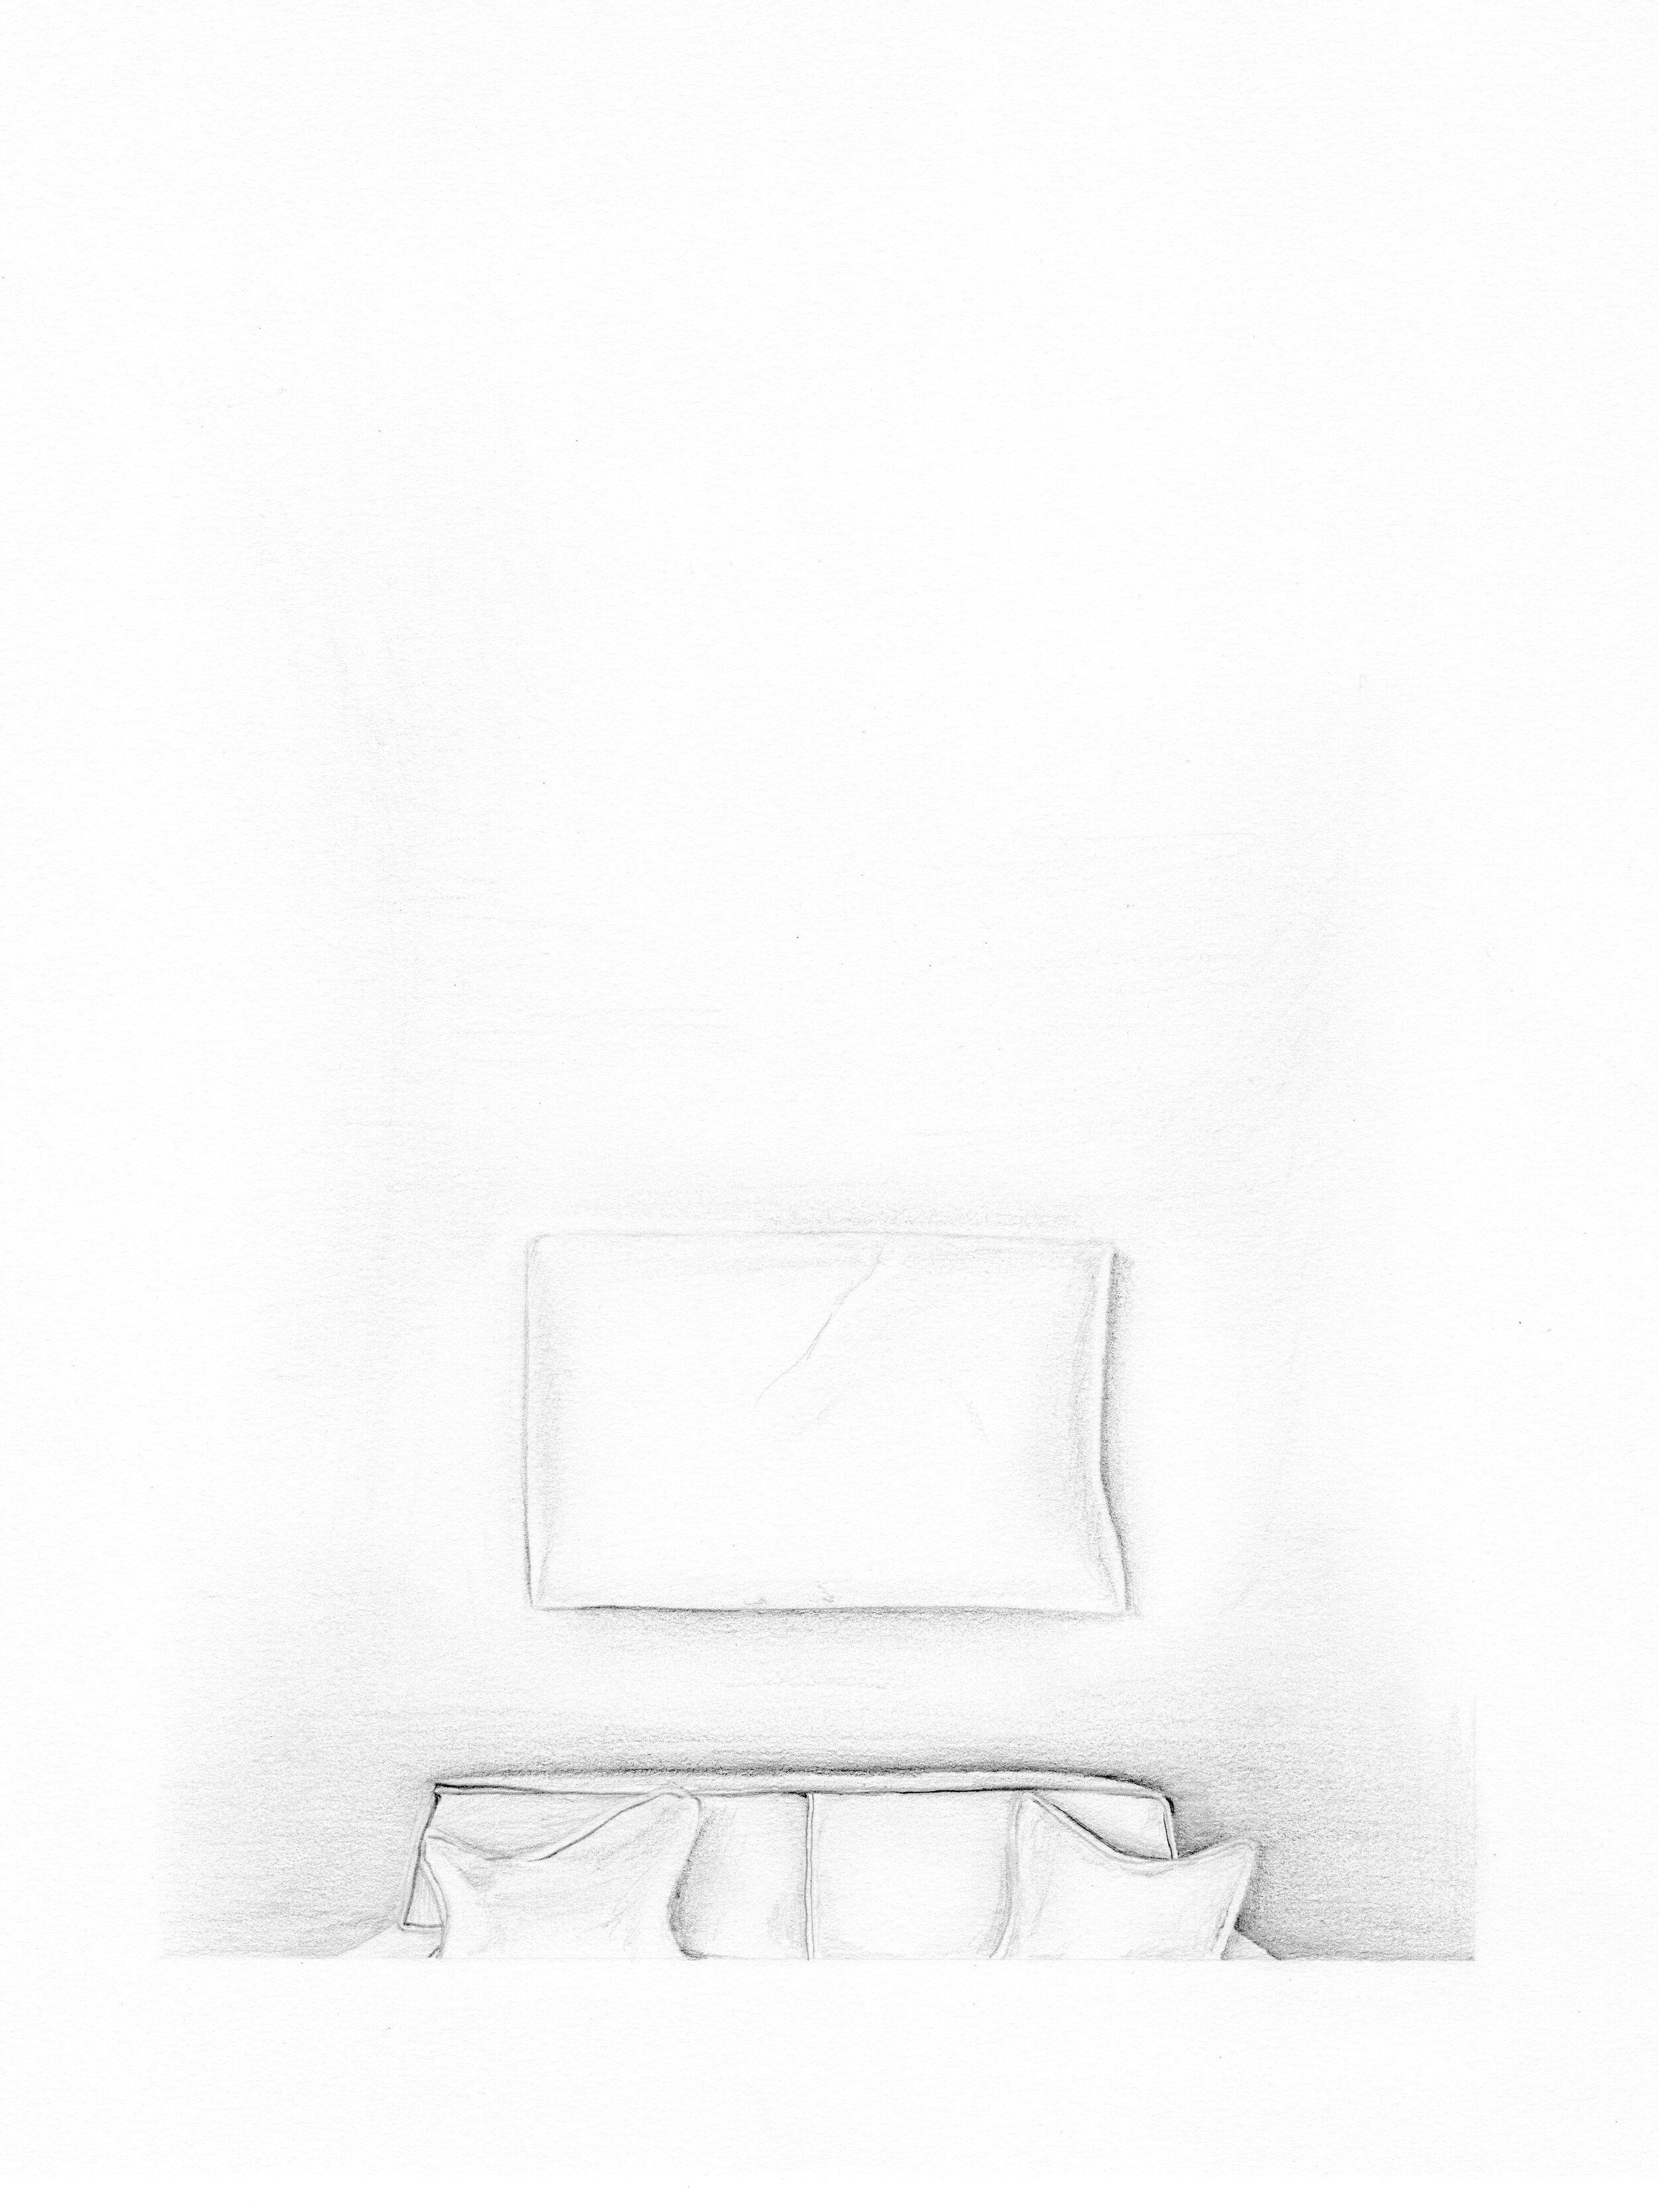 Couch and Art.jpg